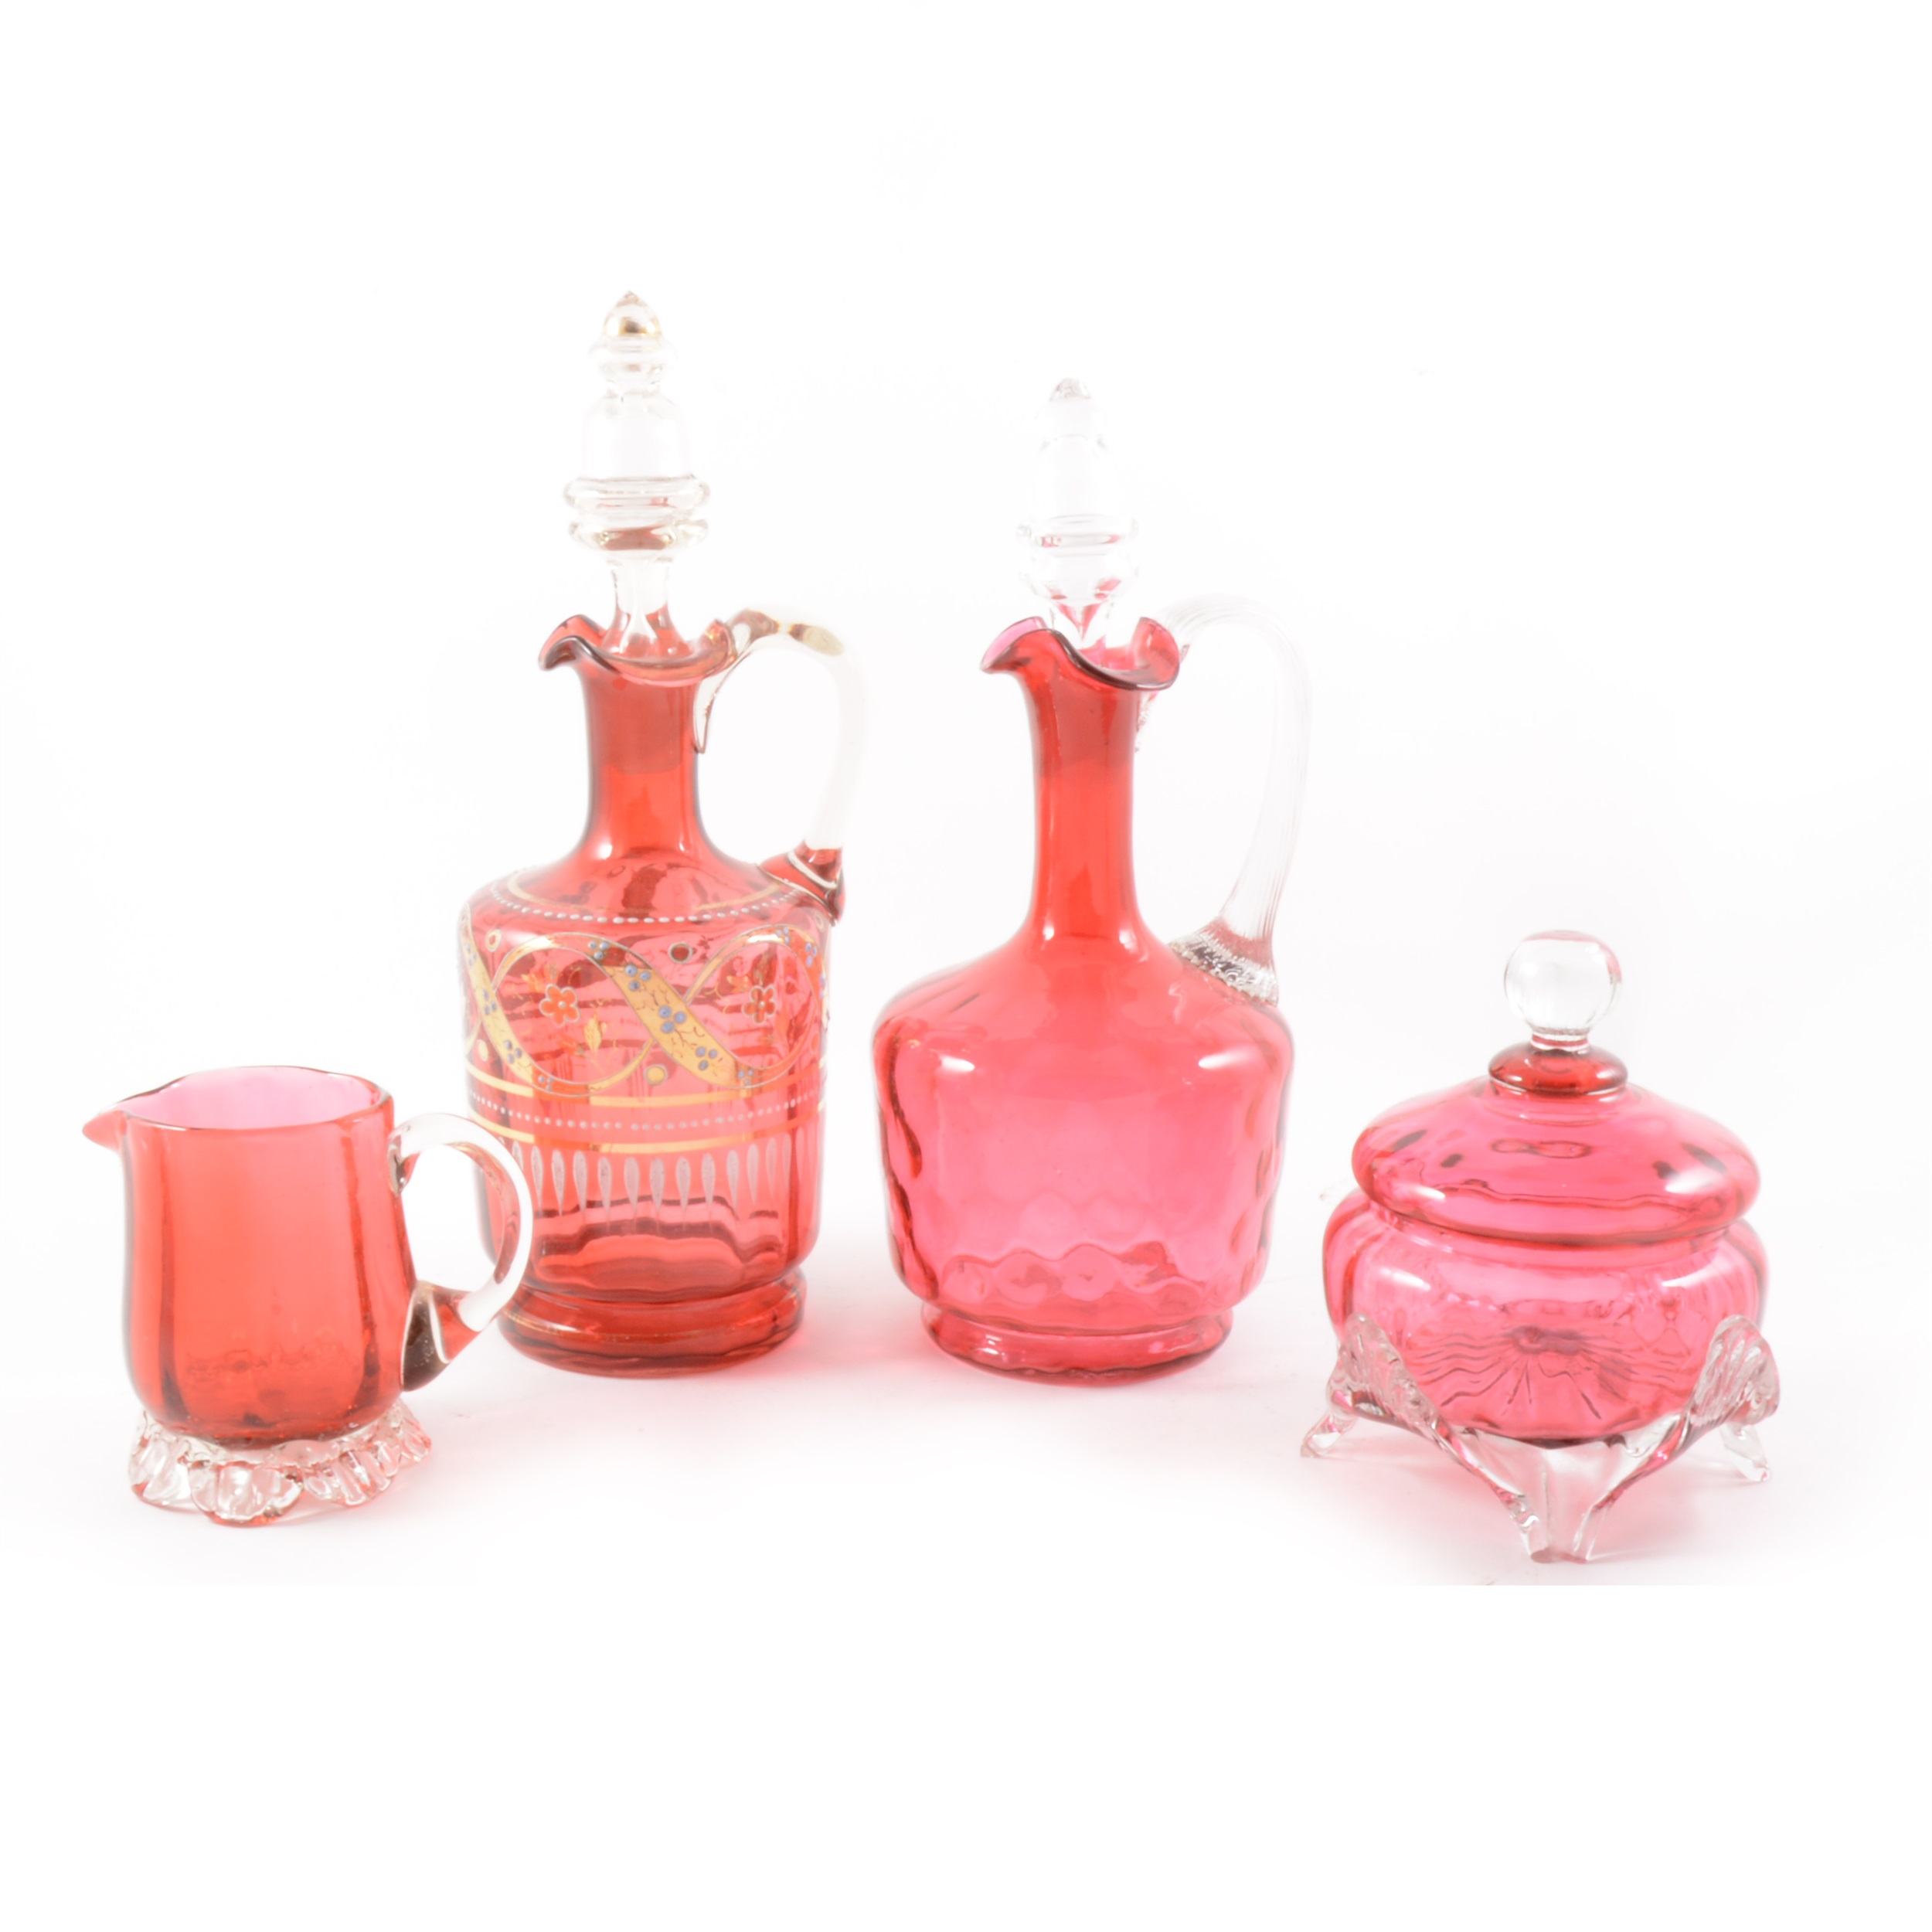 A Cranberry glass claret jug and other cranberry items